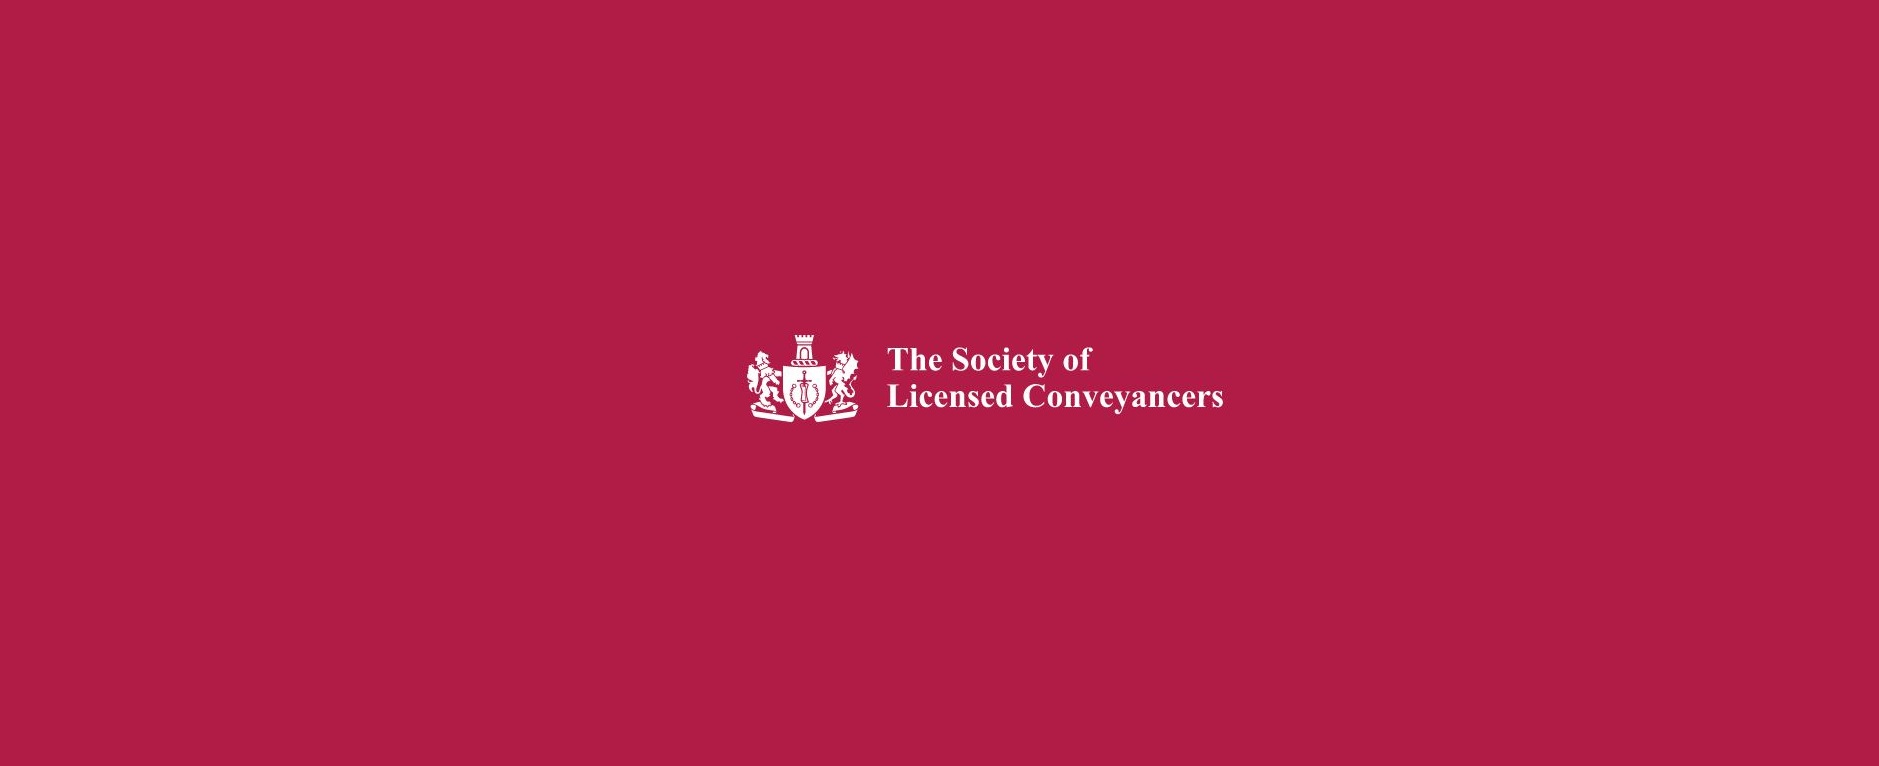 The Society of Licensed Conveyancers Annual Conference